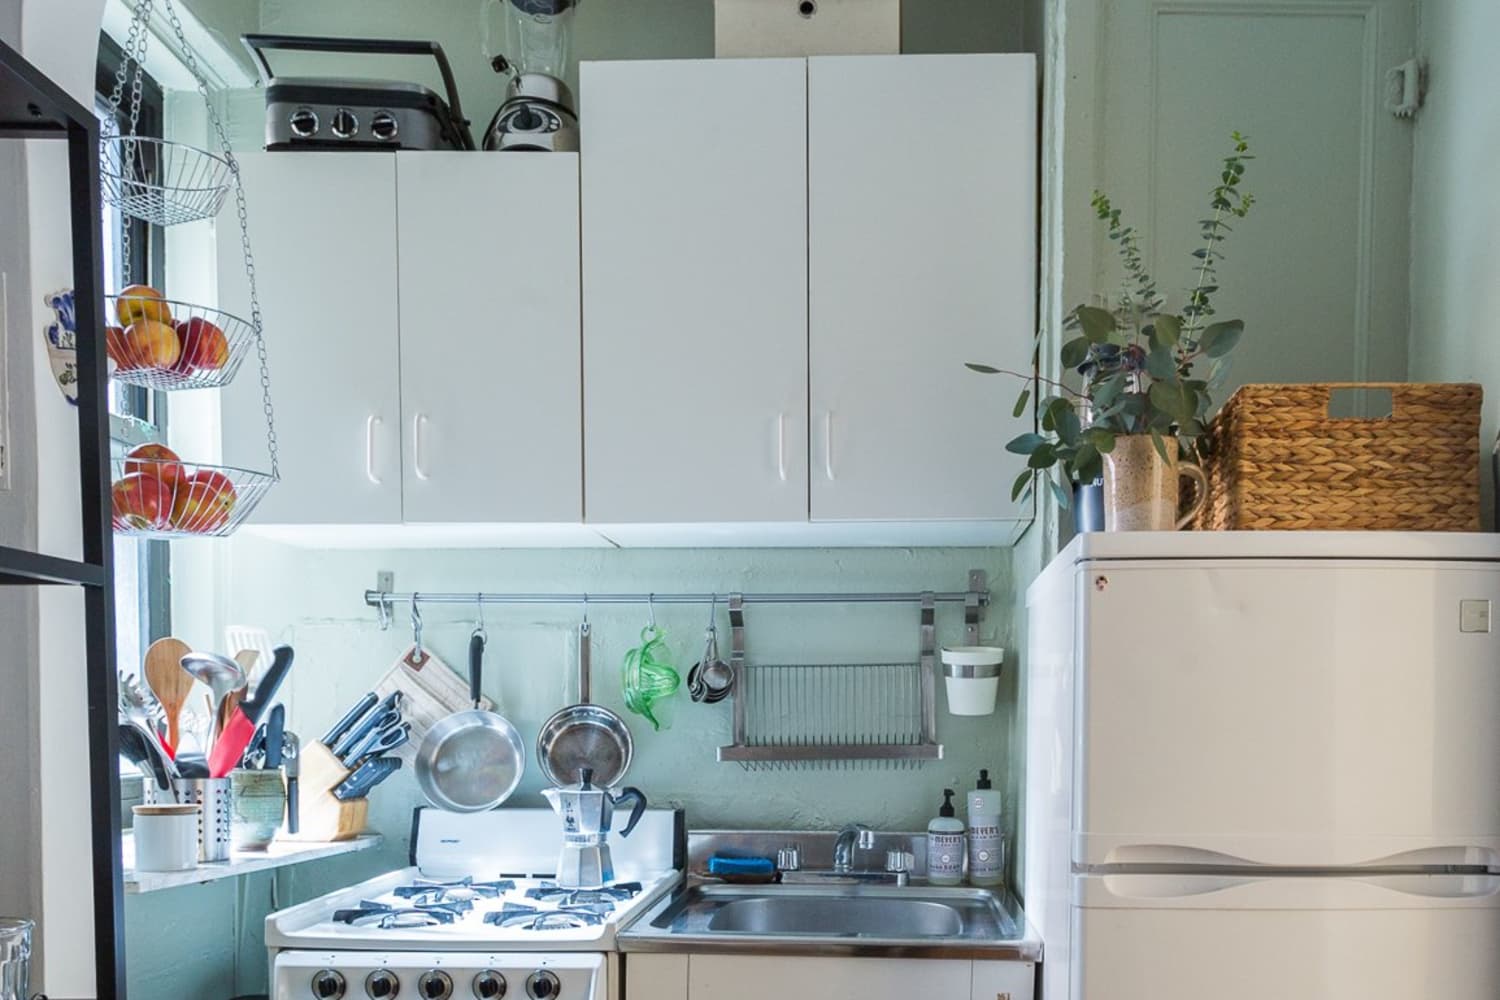 A Tiny Kitchen Made for Cooking: Everything You Need in 26 Square